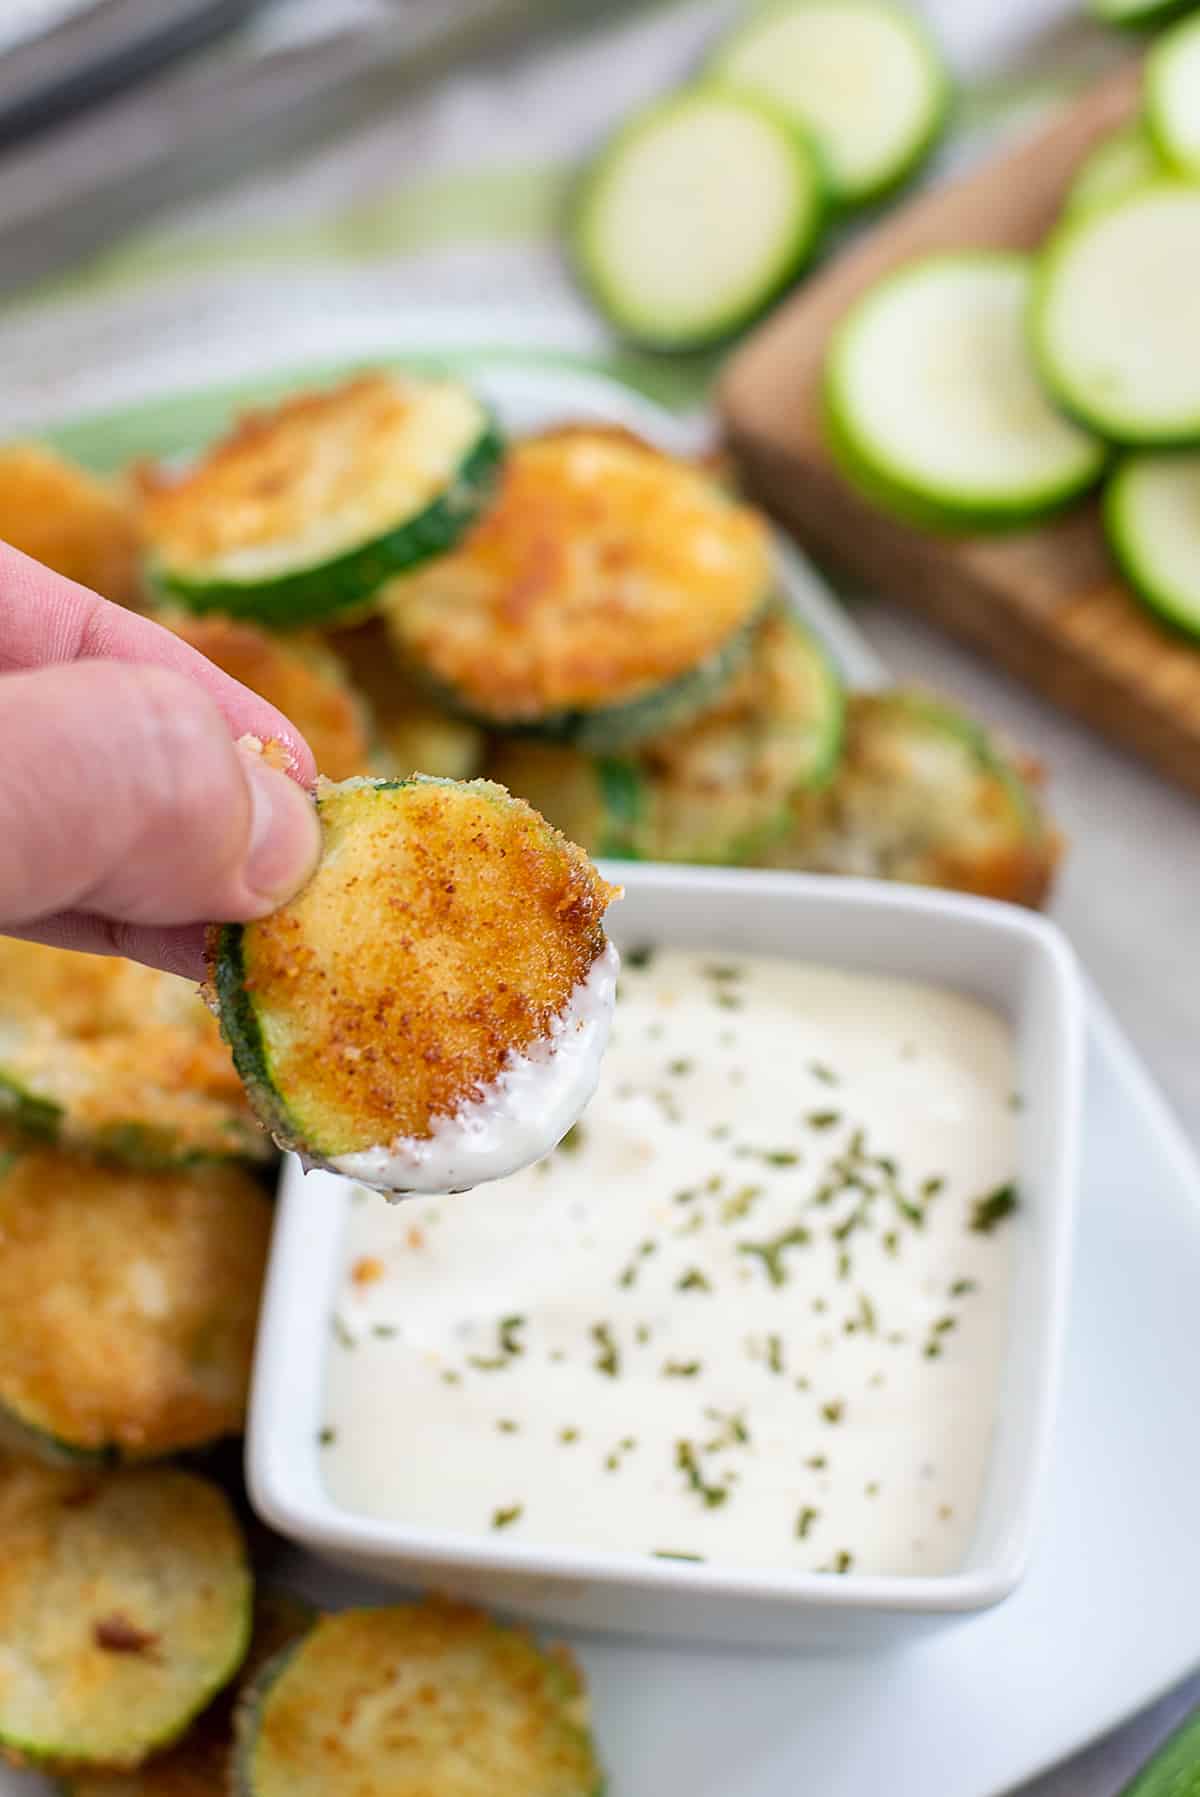 fried zucchini being dipped in ranch.